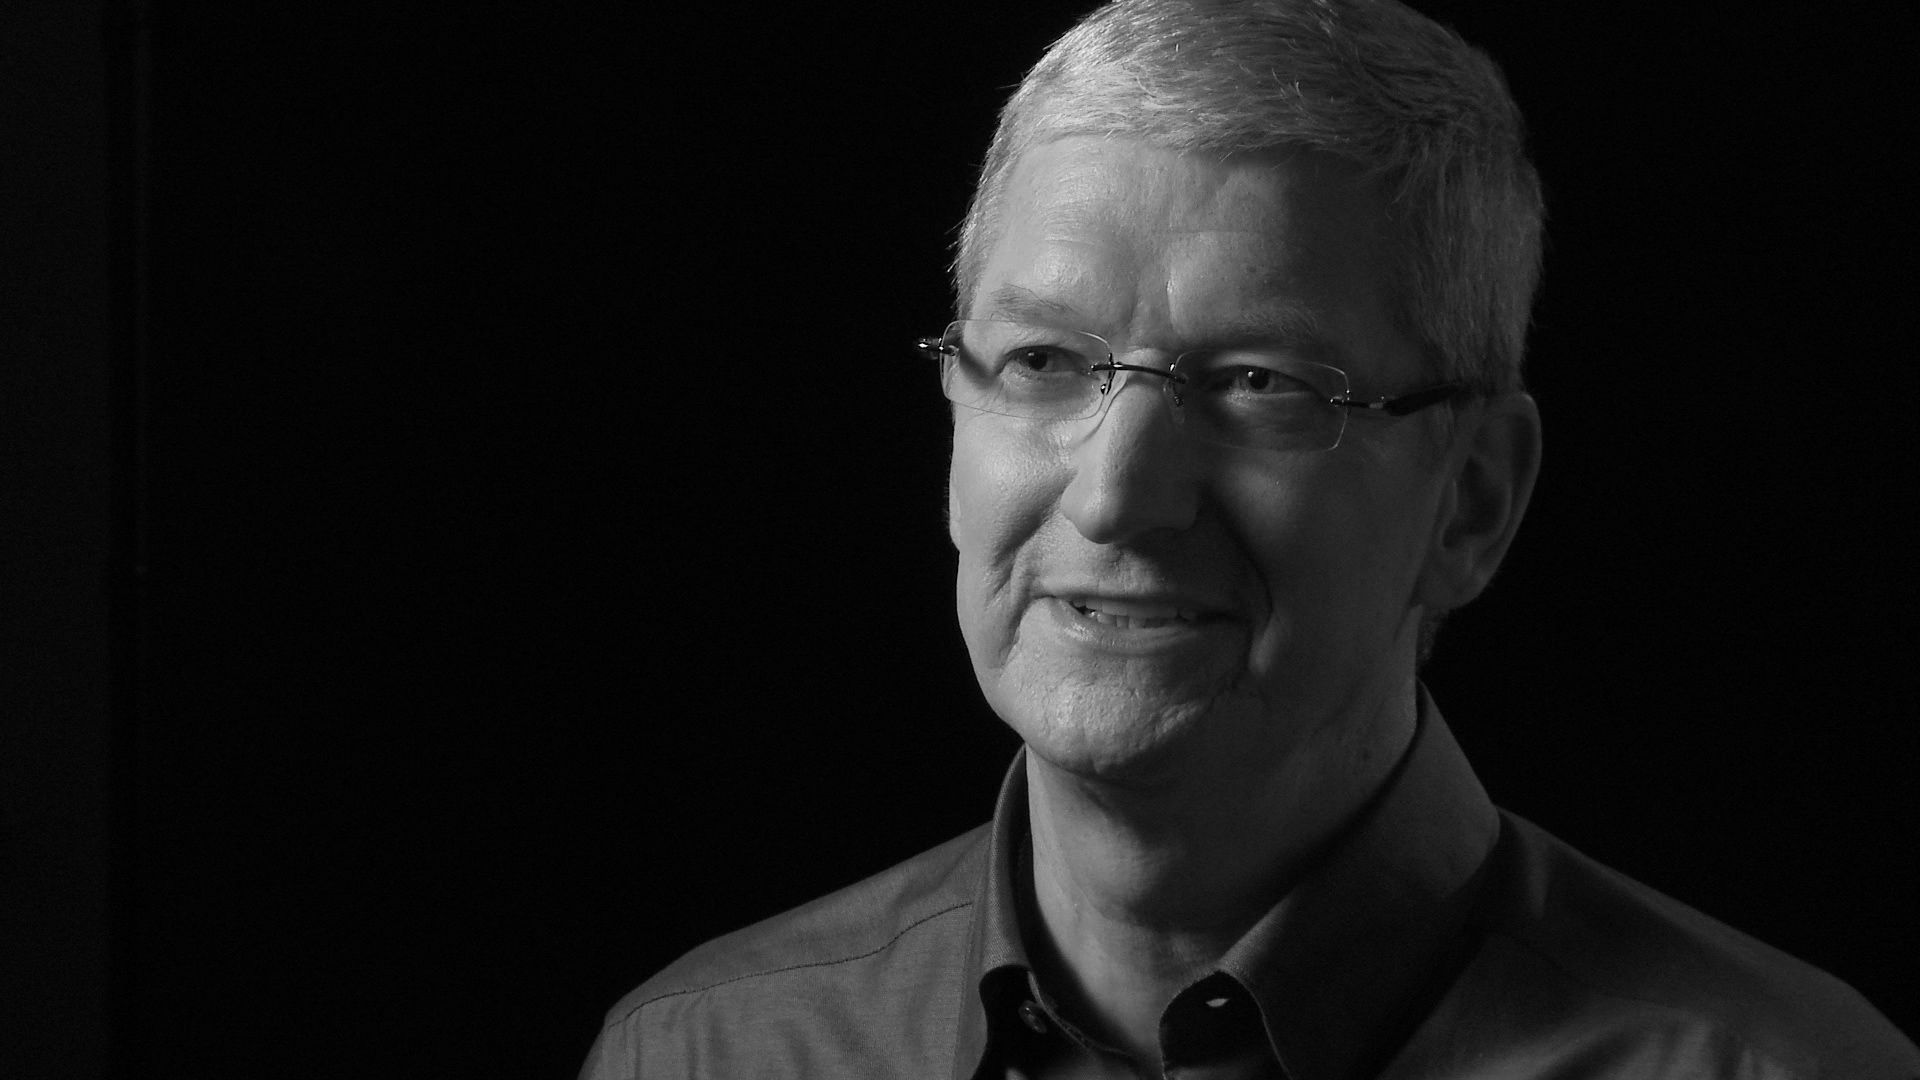 Tim Cook says Steve Jobs was 'heat shield' for Apple. On